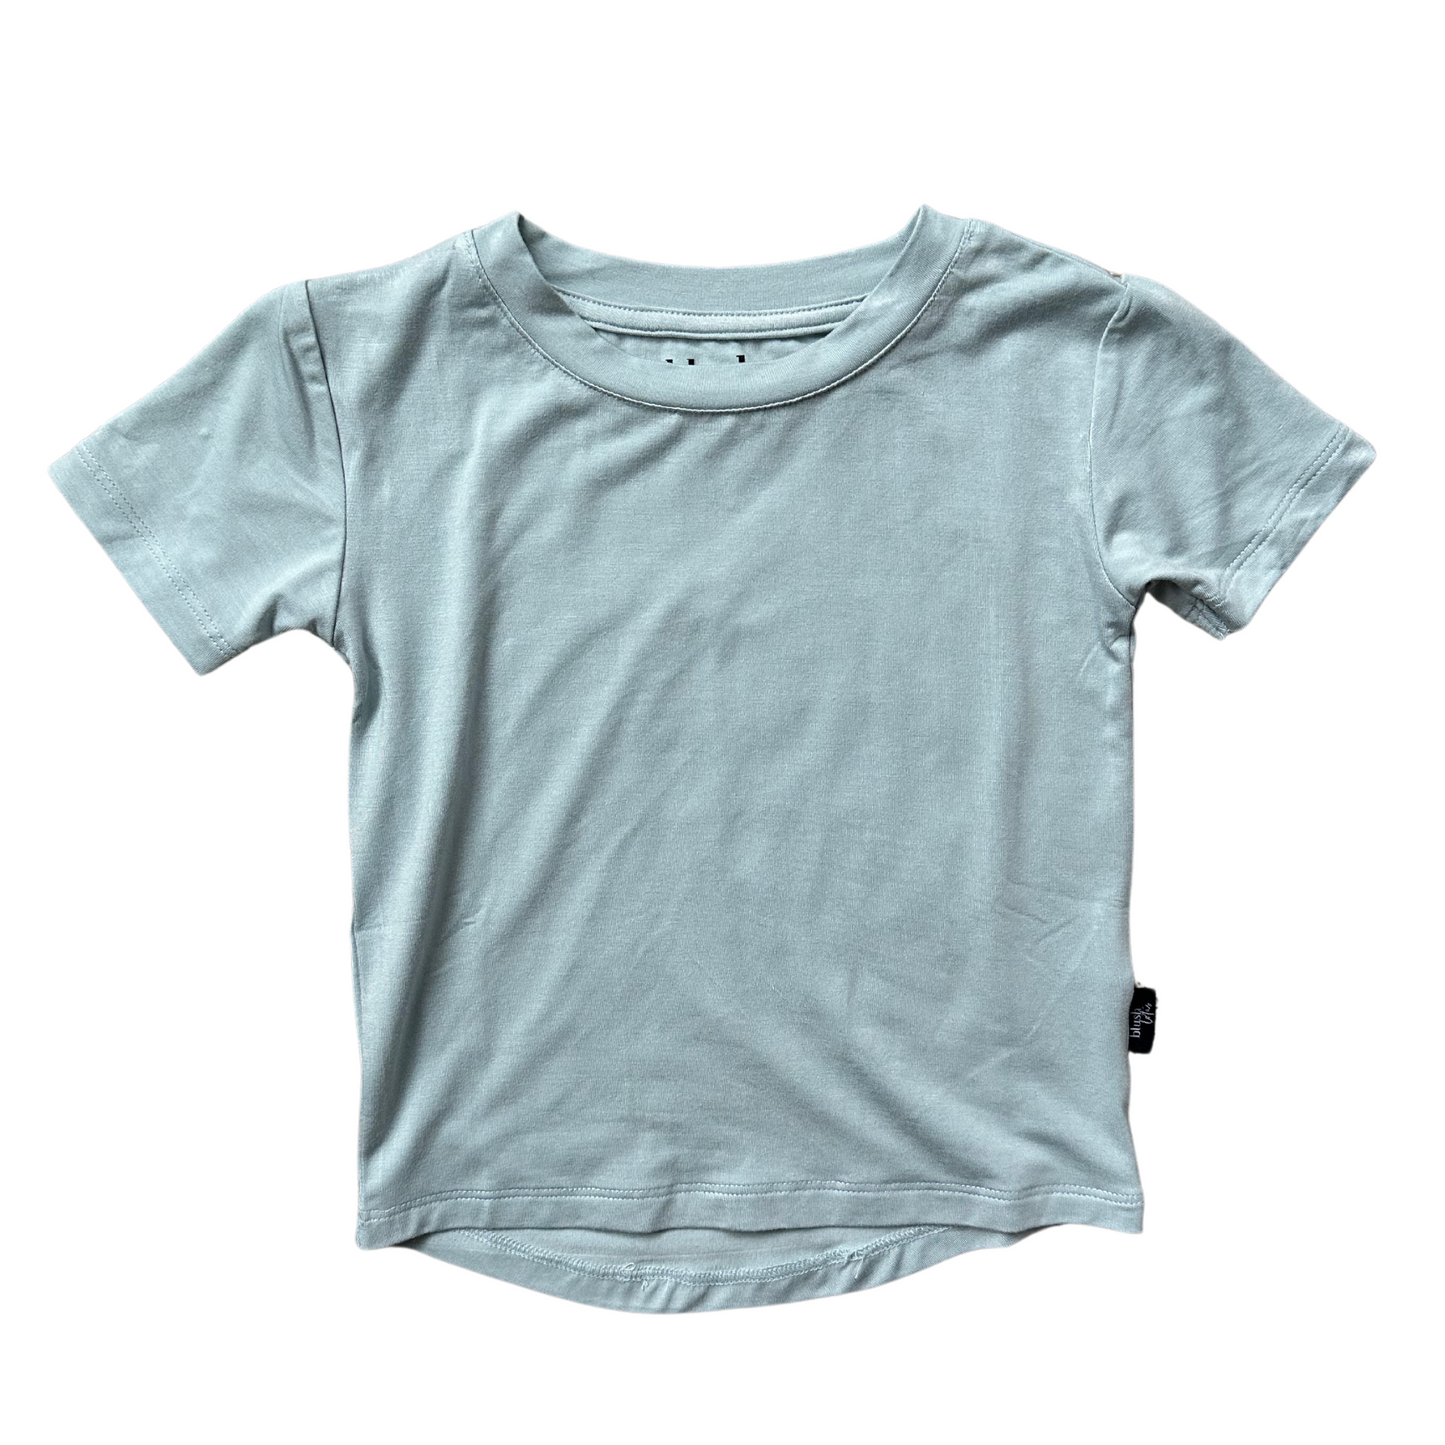 Everyday Tee - Pale Blue